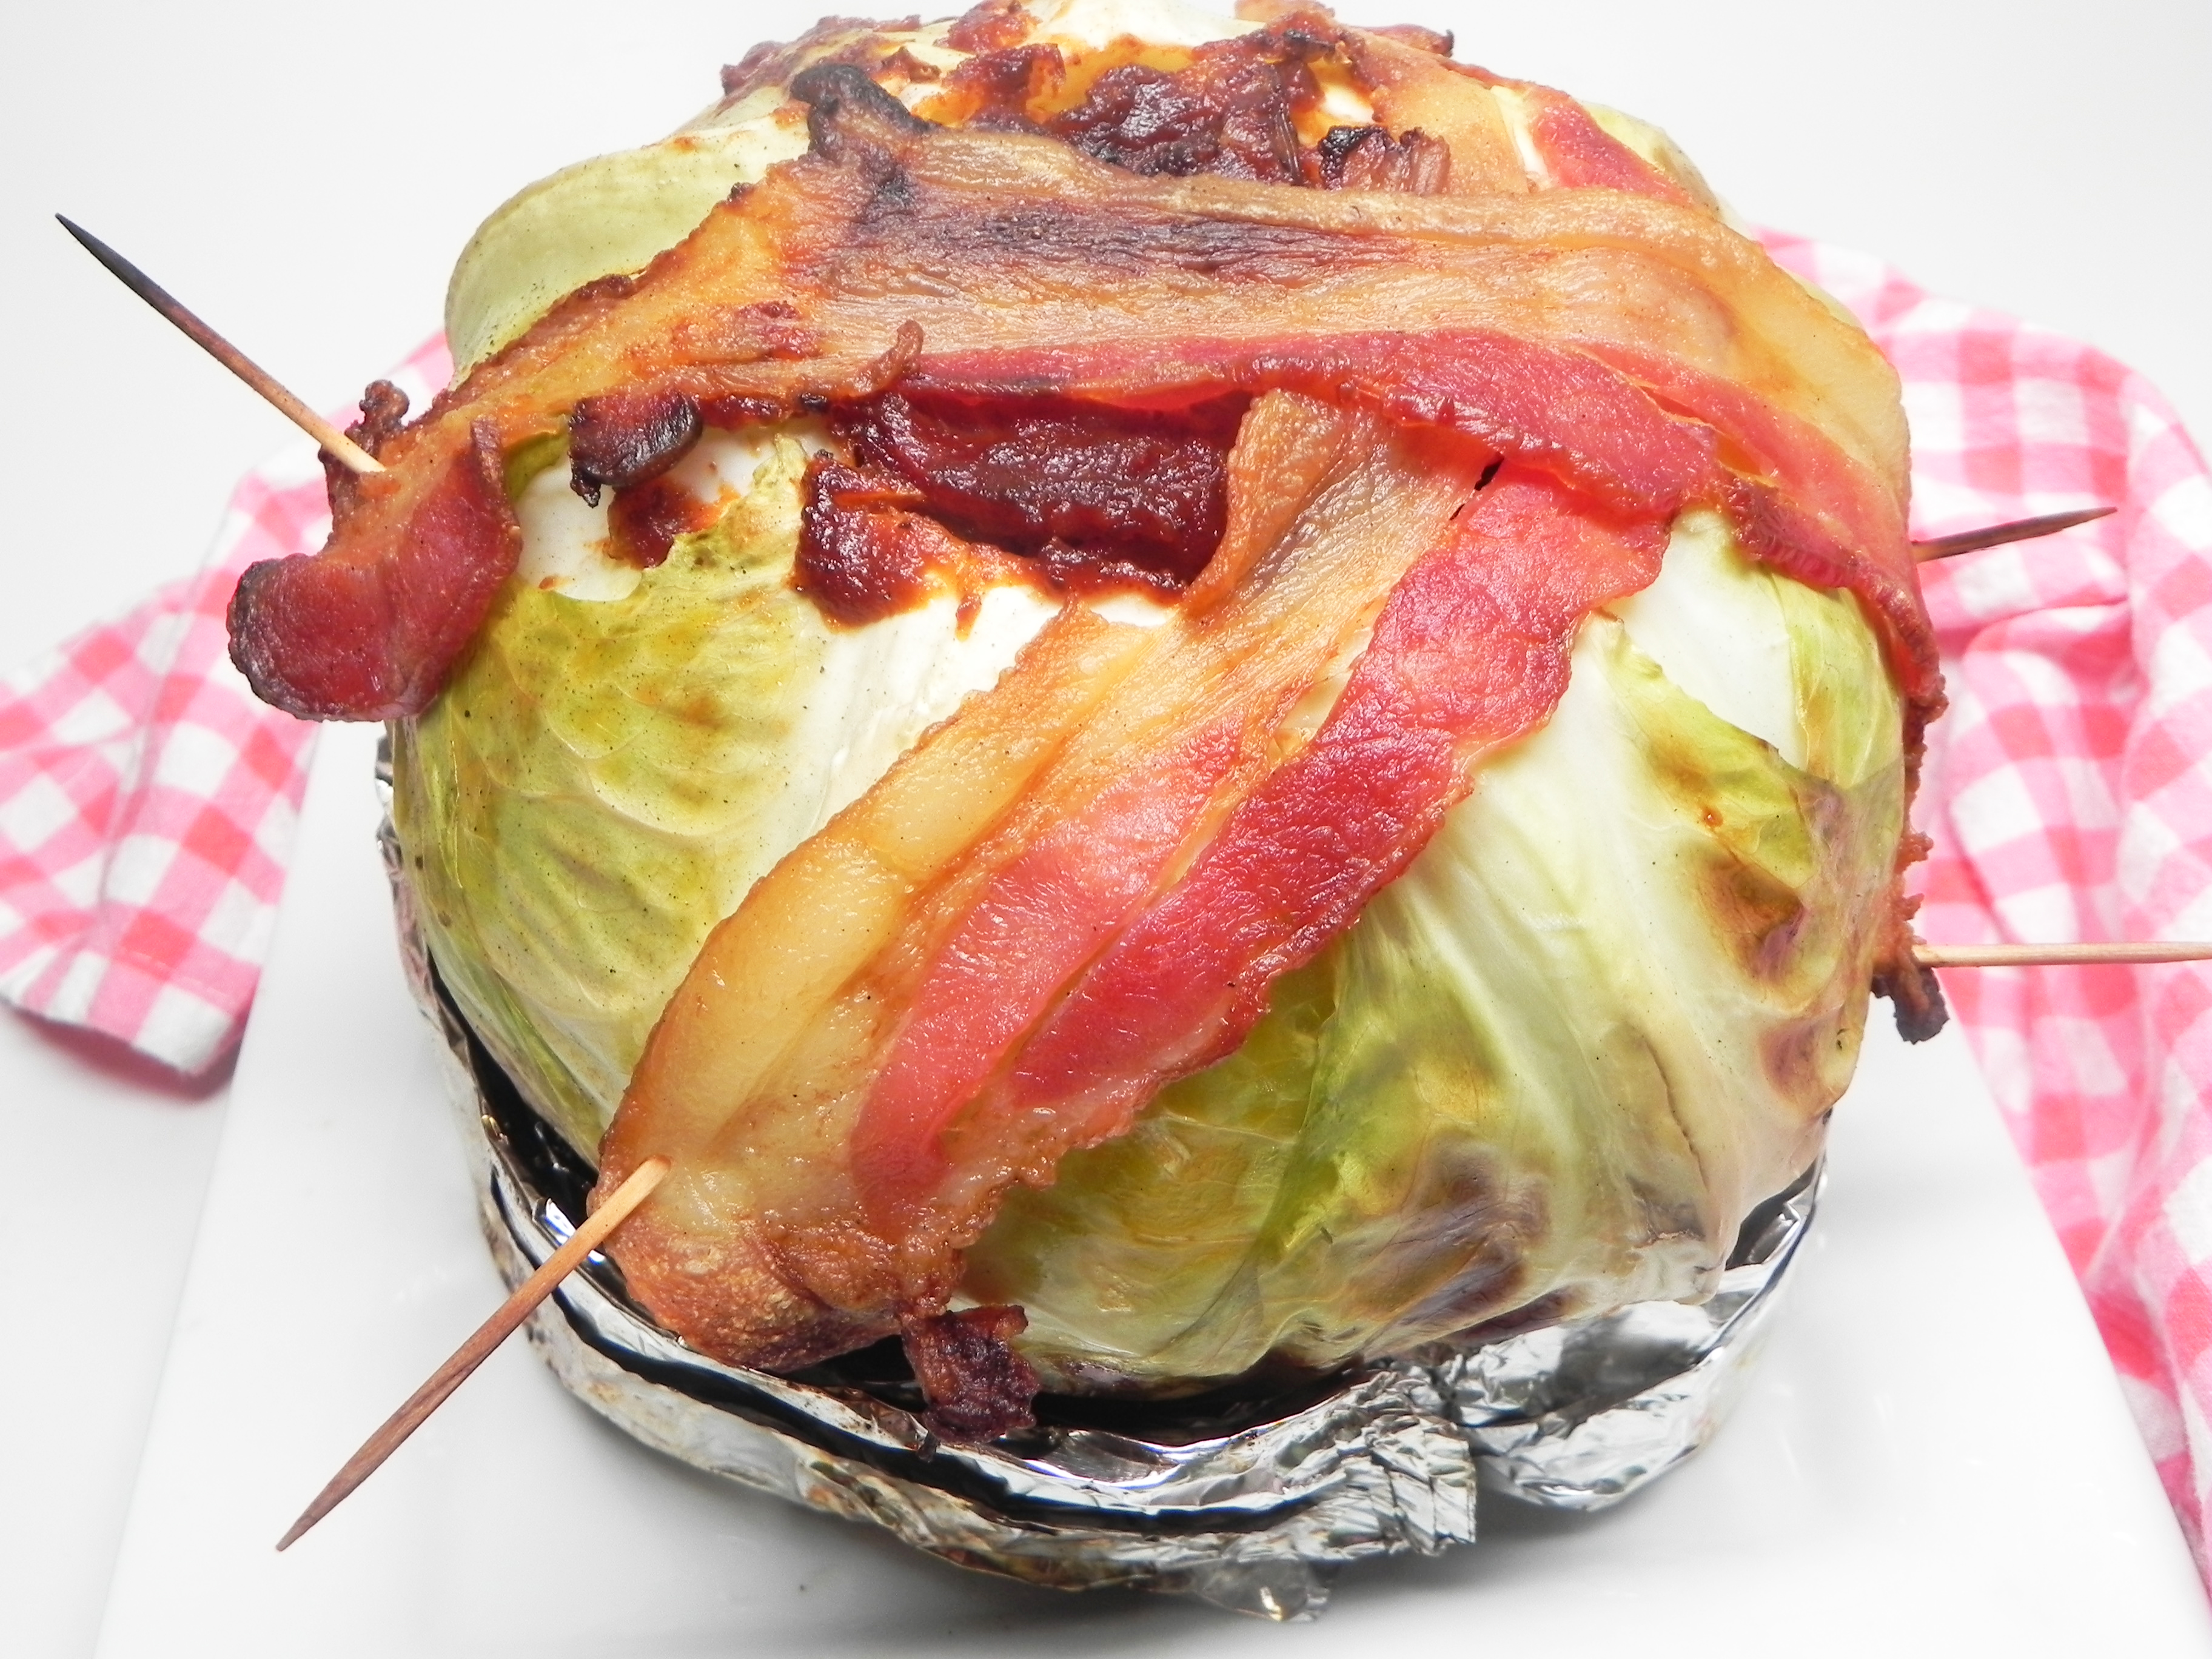 Grilled Cabbage with Bacon